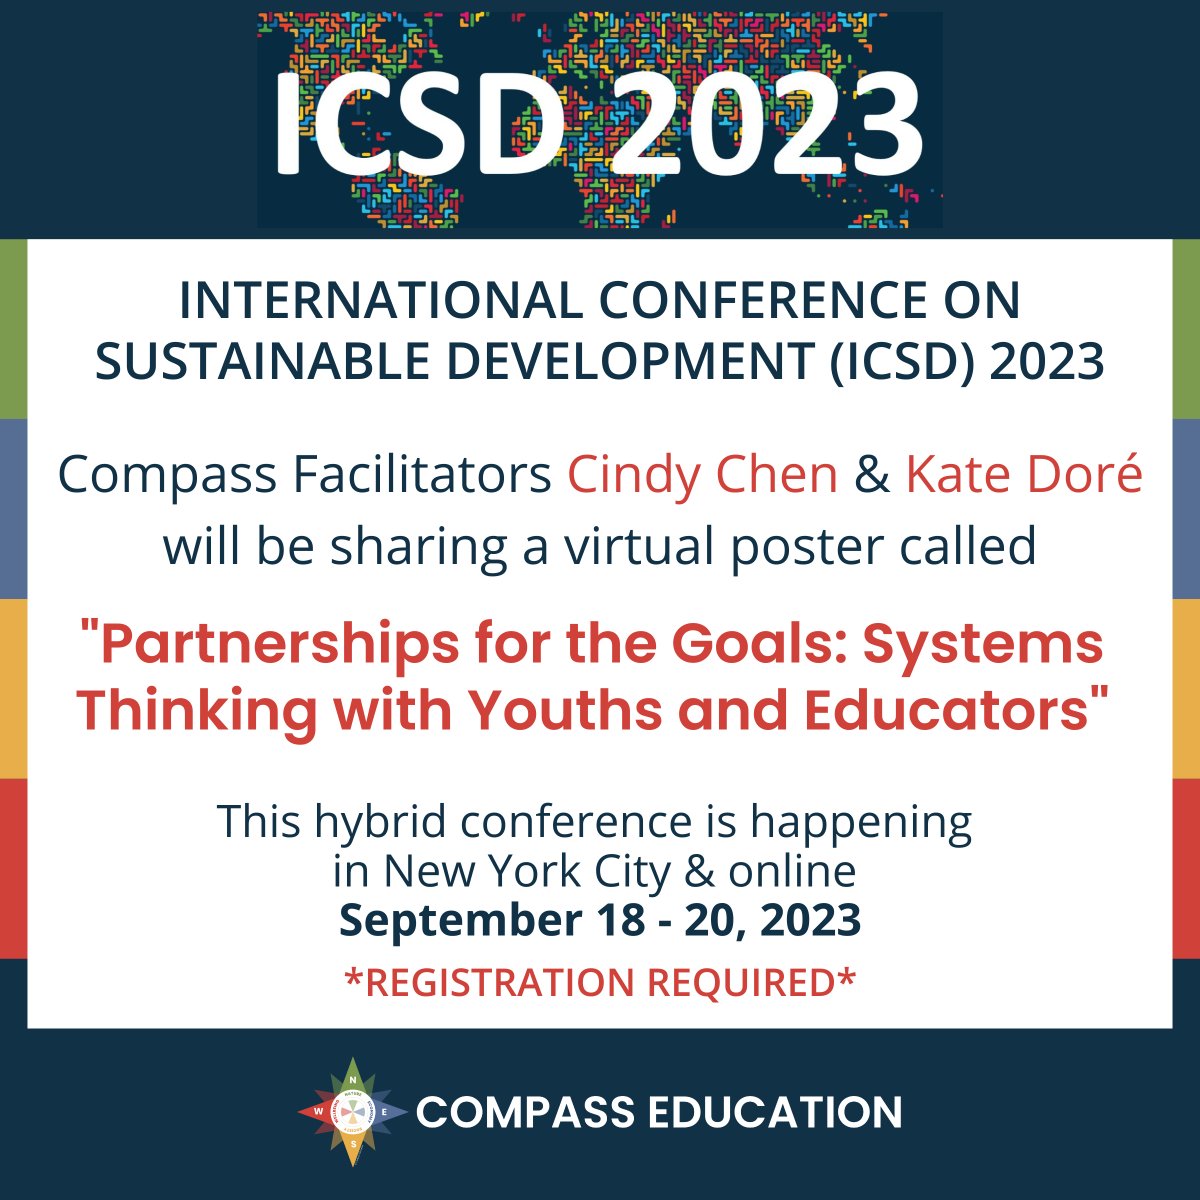 Be sure to check out @CindyHYChen & Kate Doré’s virtual poster highlighting some of the work they’ve done with @Compass_Ed to help youth engage with the UN SDGs “Partnerships for the Goals: Systems Thinking with Youths & Educators” ic-sd.org/register/ #ICSD2023 @TSLEd4SustDev